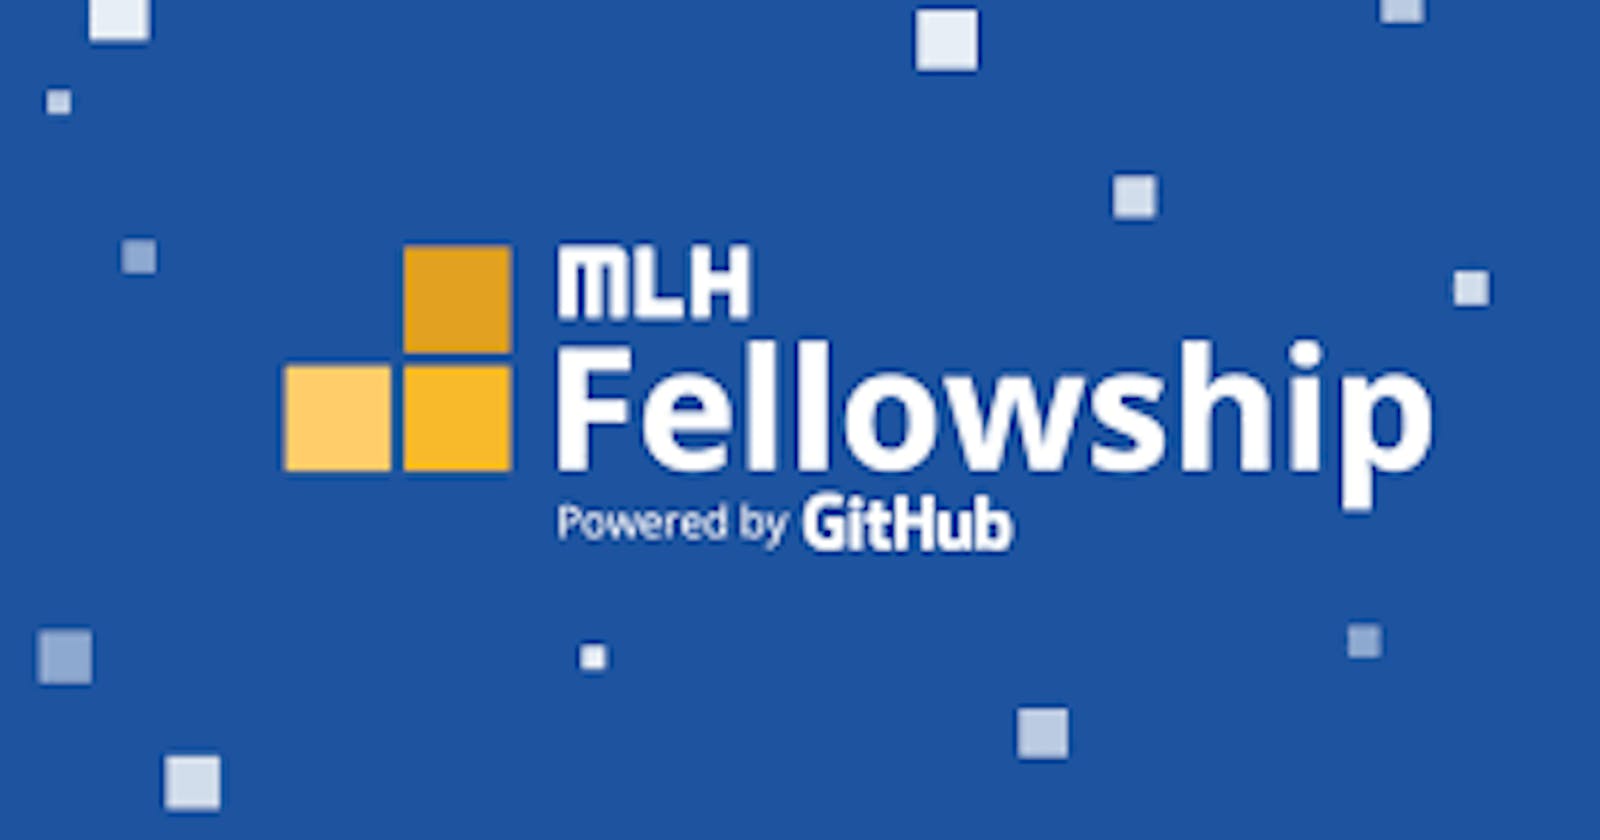 Best Tips To Help You With An Outstanding MLH Fellowship Application